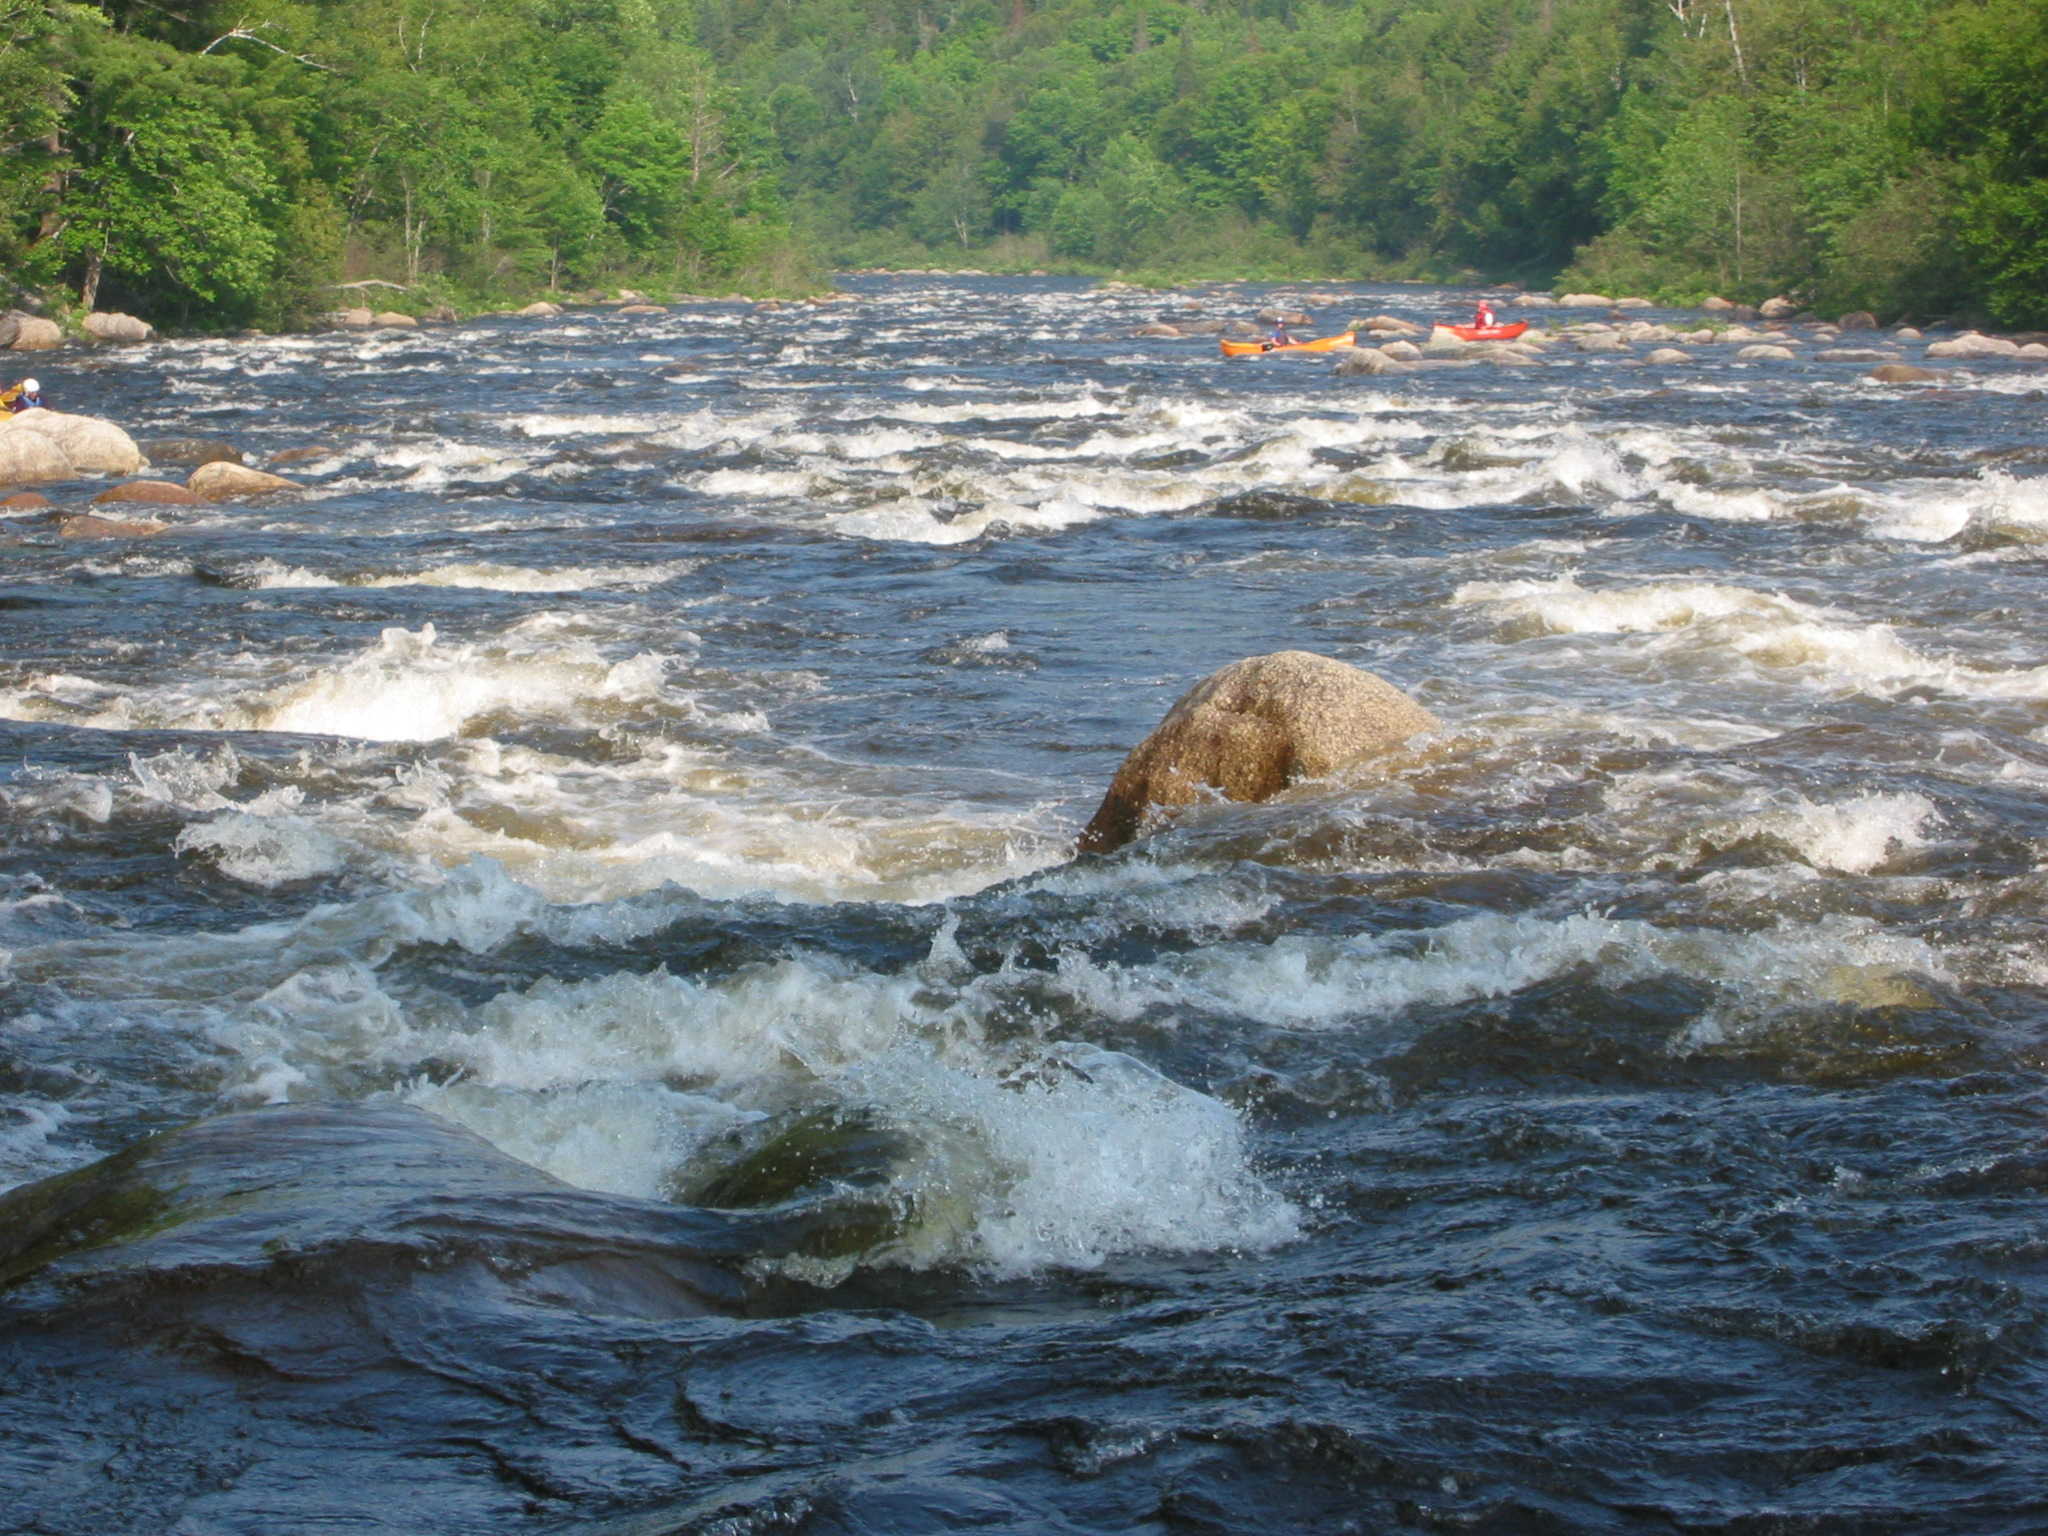 Typical rapids on the Dead at 2,400 cfs